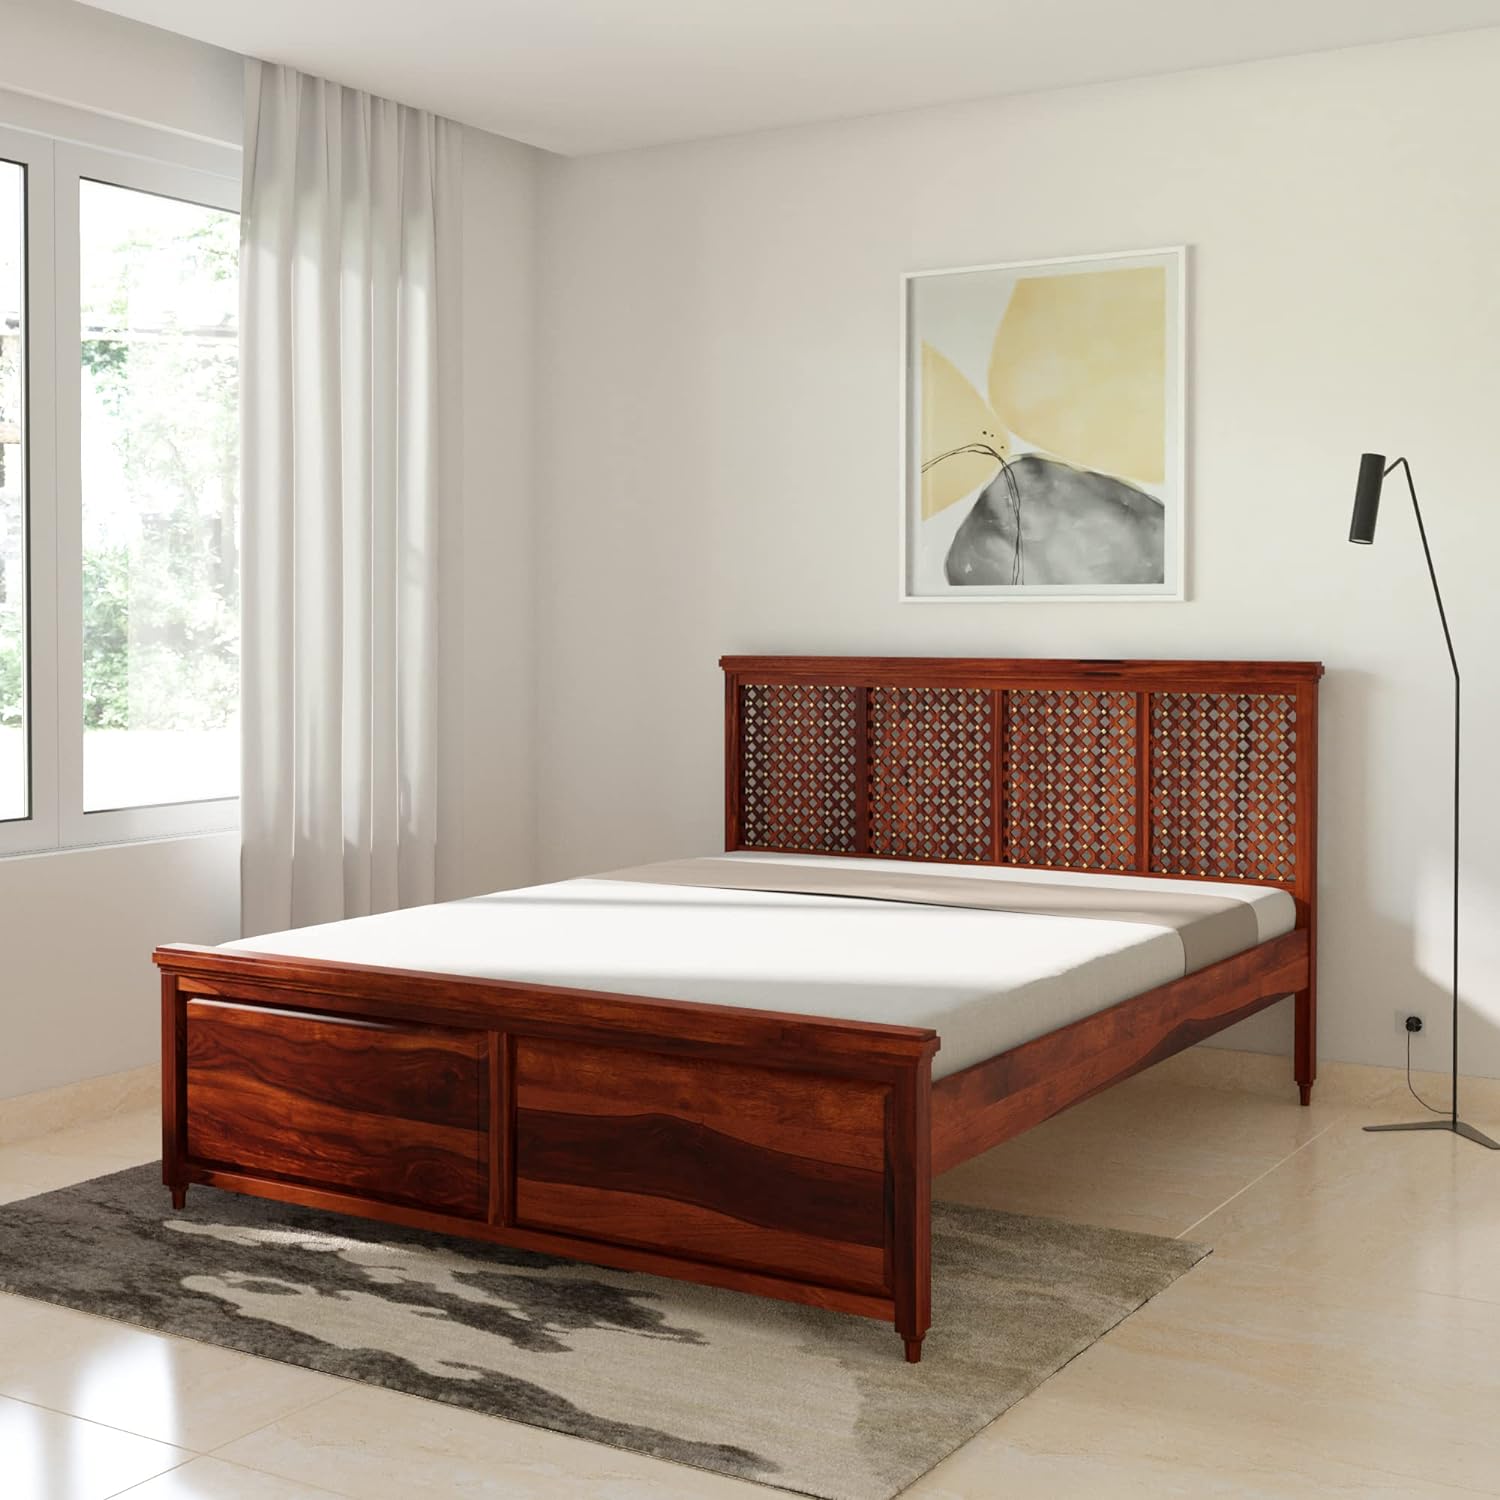 Traun Queen Size Solid Sheesham Wood Bed Without Storage (Honey Finish)